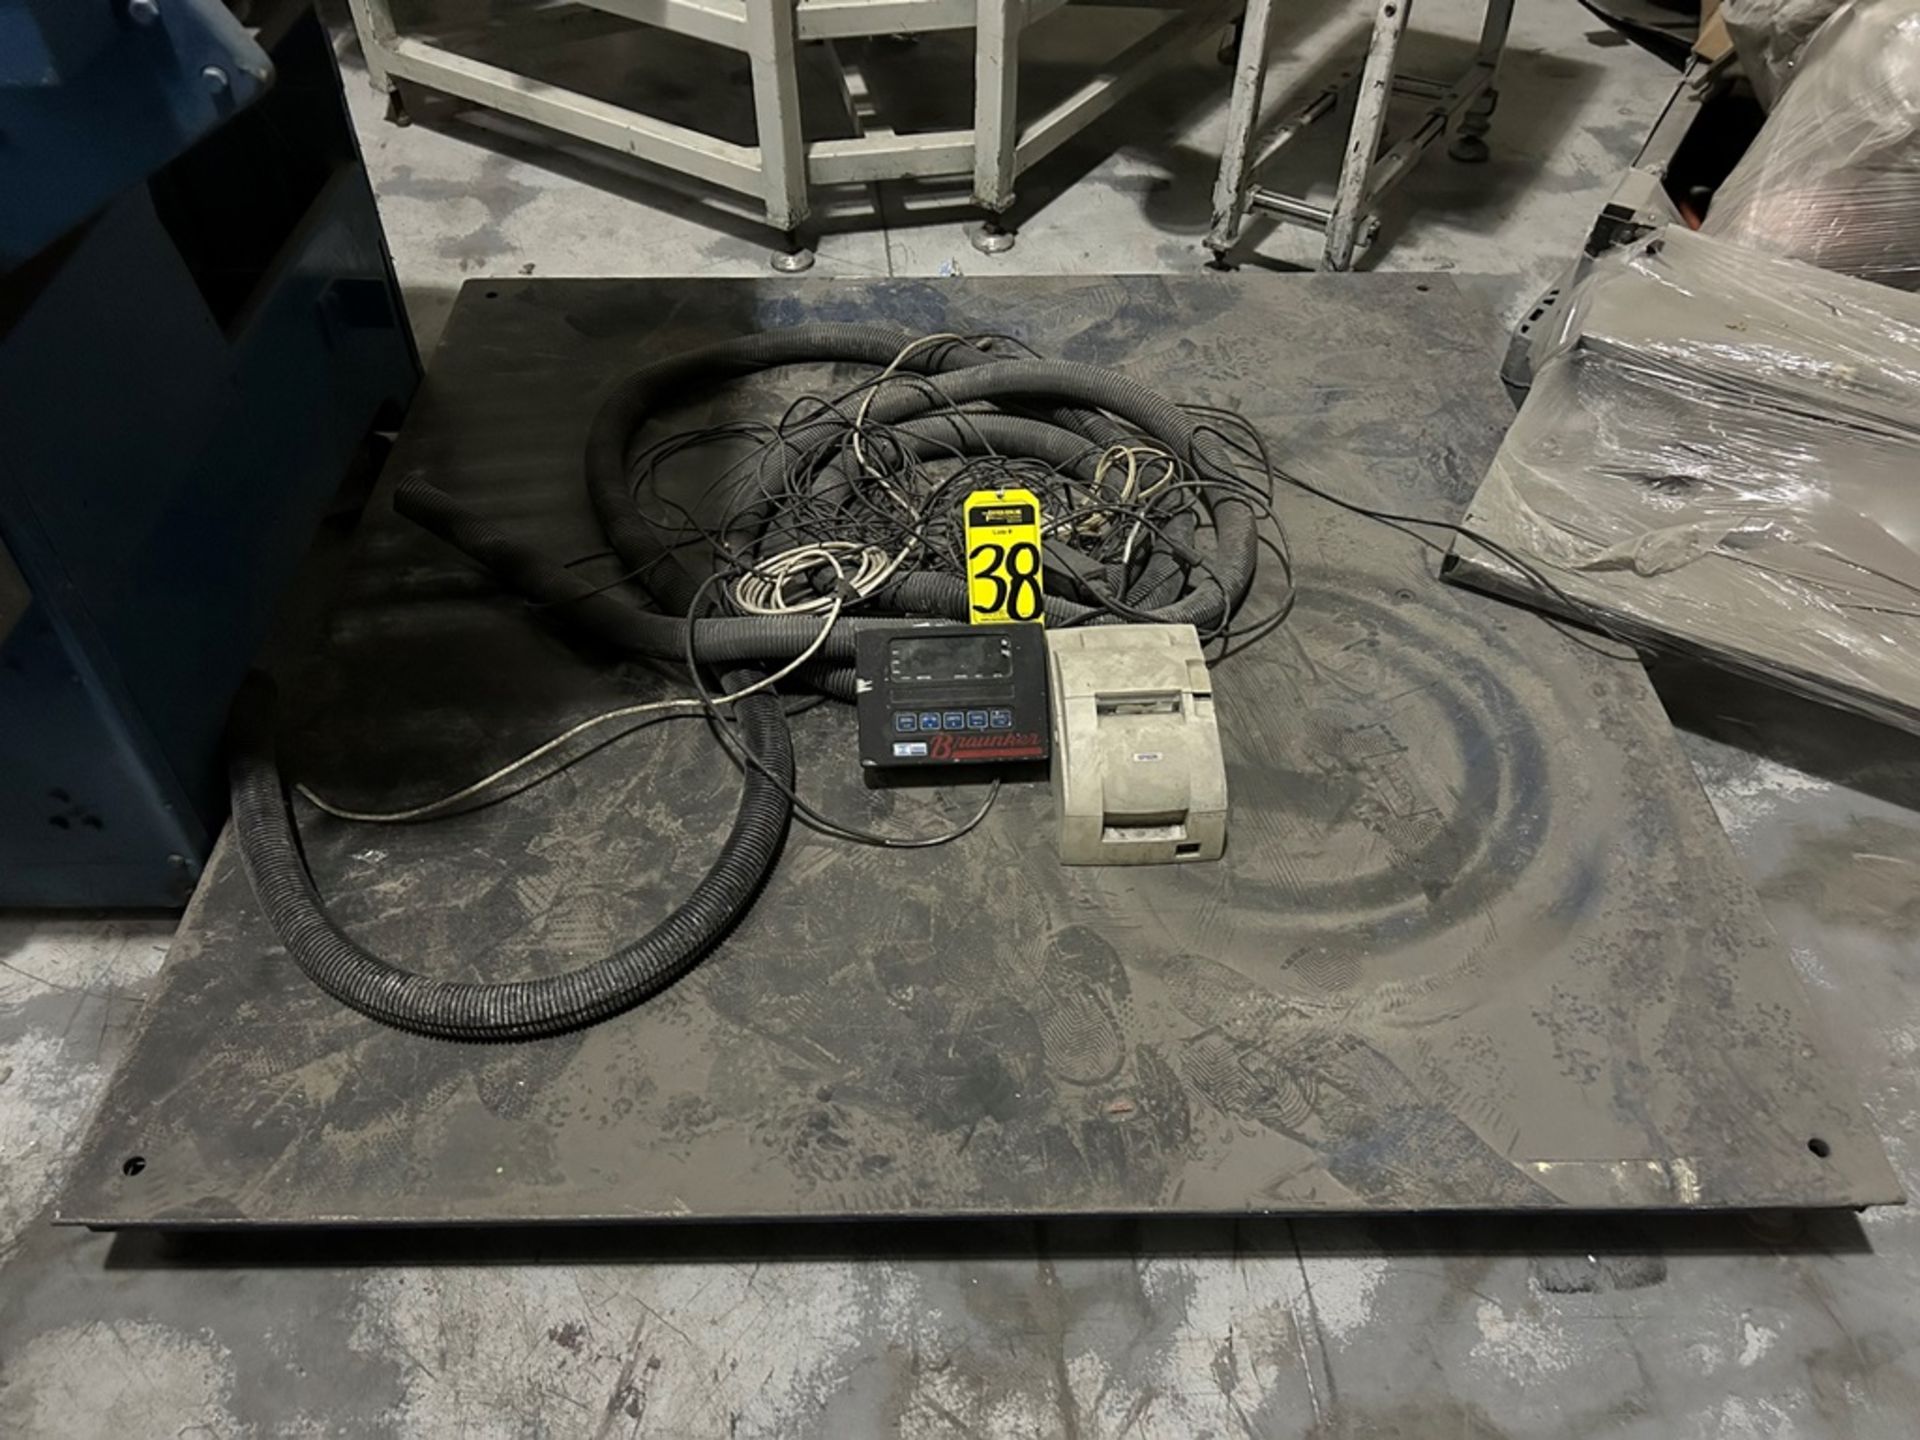 Braunker Floor Scale, Model 350, Serial No. 964175, Year ND, 110V, Maximum capacity 1 ton. / Bascul